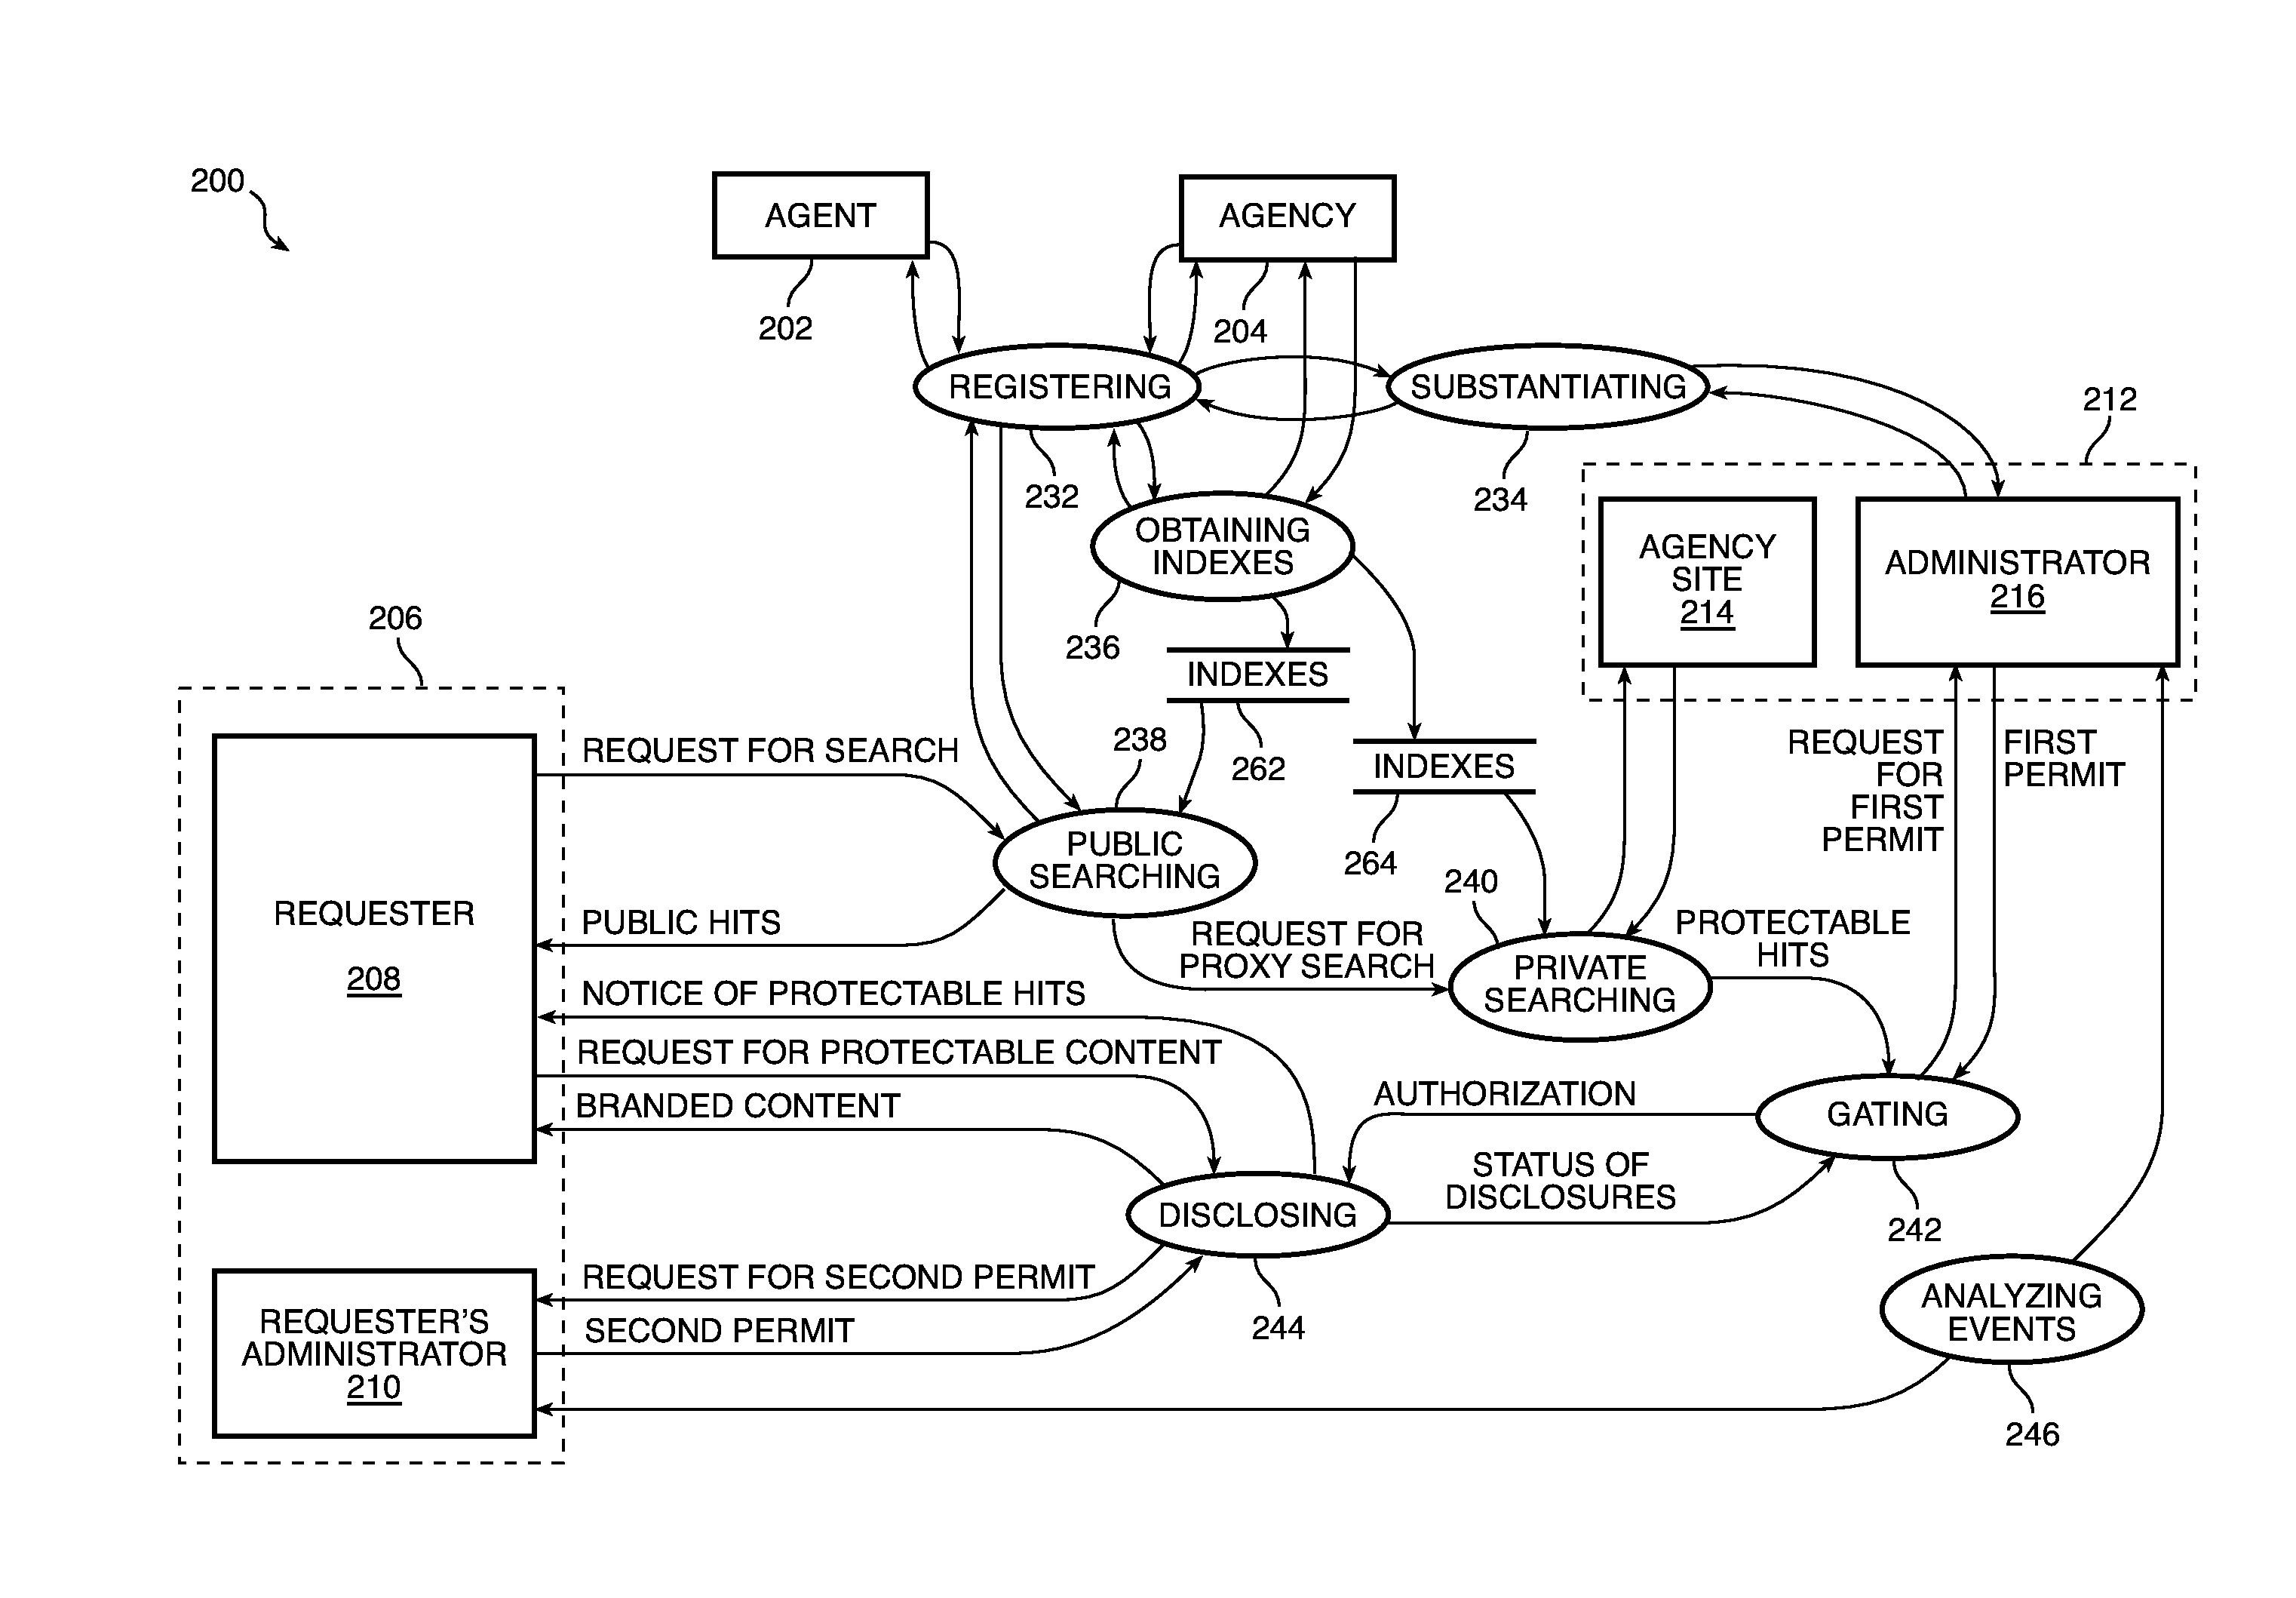 Systems And Methods For Managing Disclosure Of Protectable Information